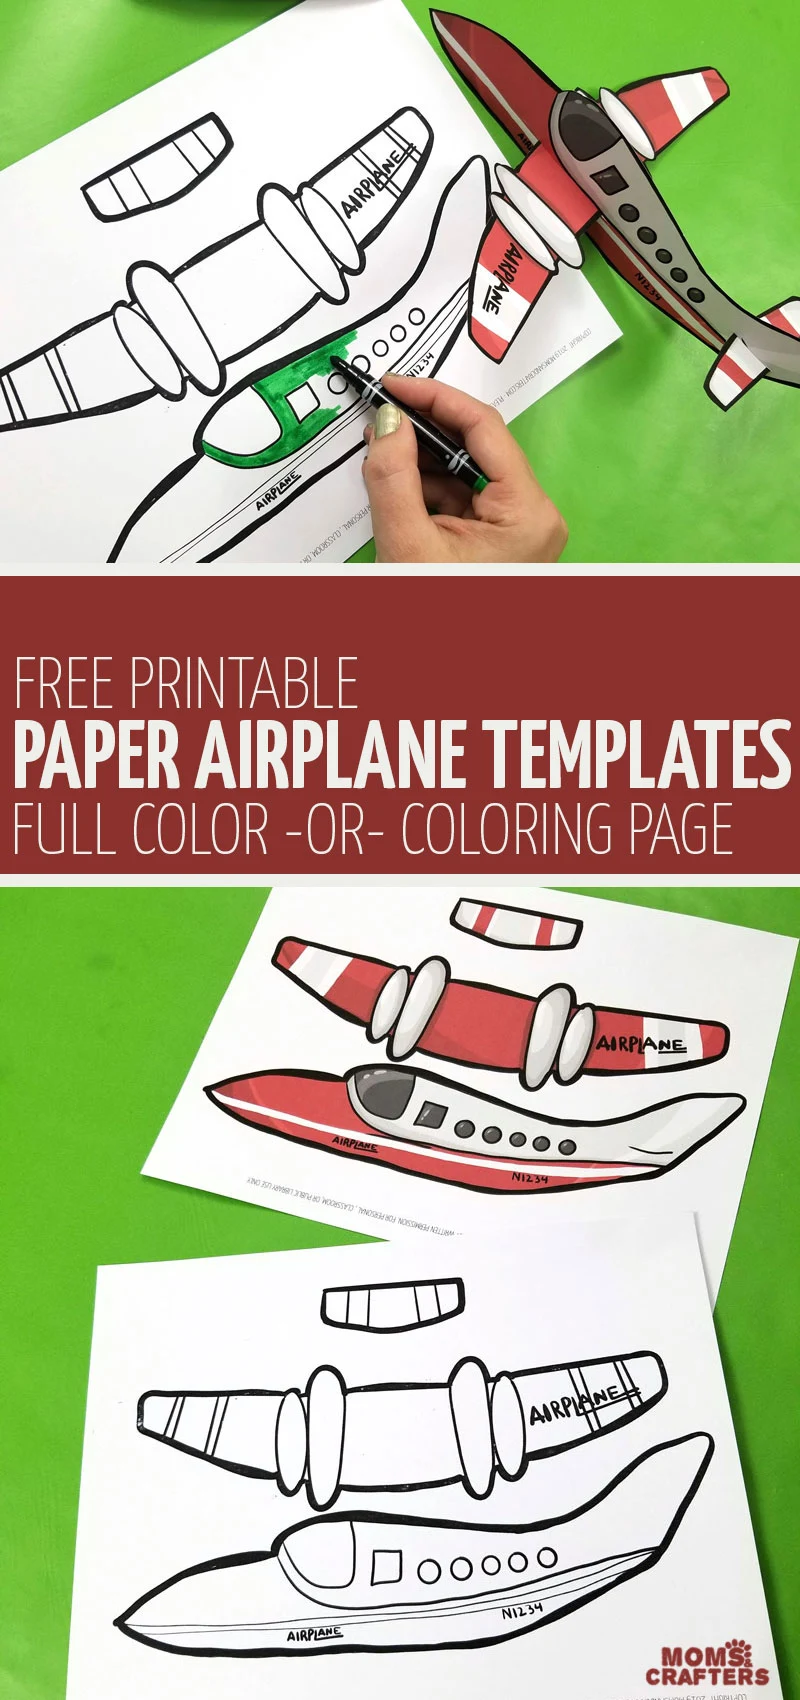 CLick for this free printable easy paper airplane templates in the full color and coloring page version! This fun kids craft and paper toy is a super fun paper craft to make for travel. 